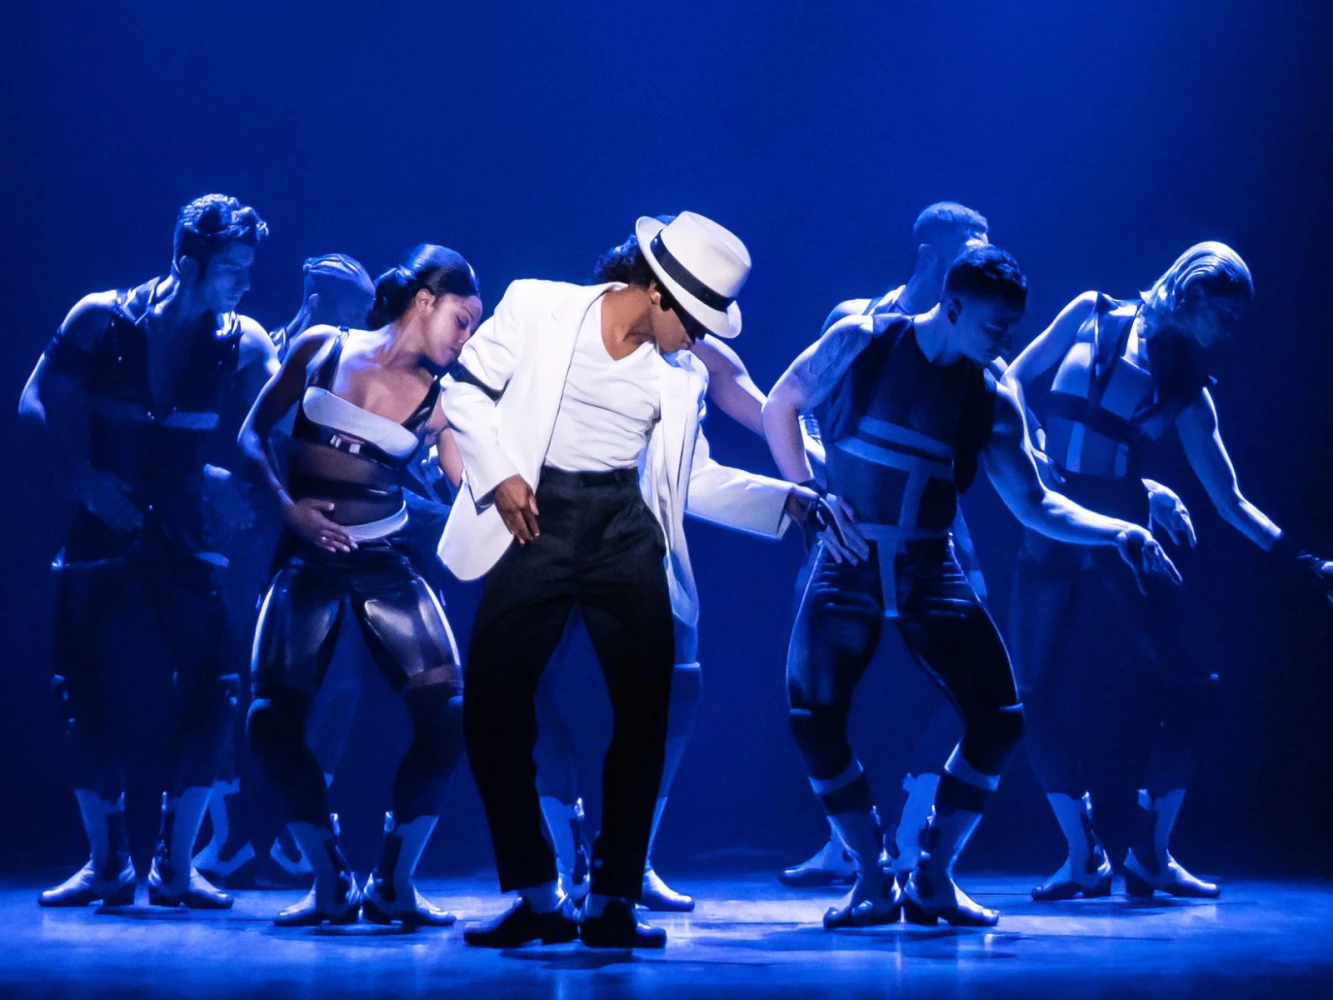 MJ The Musical at Segerstrom: What to expect - 3